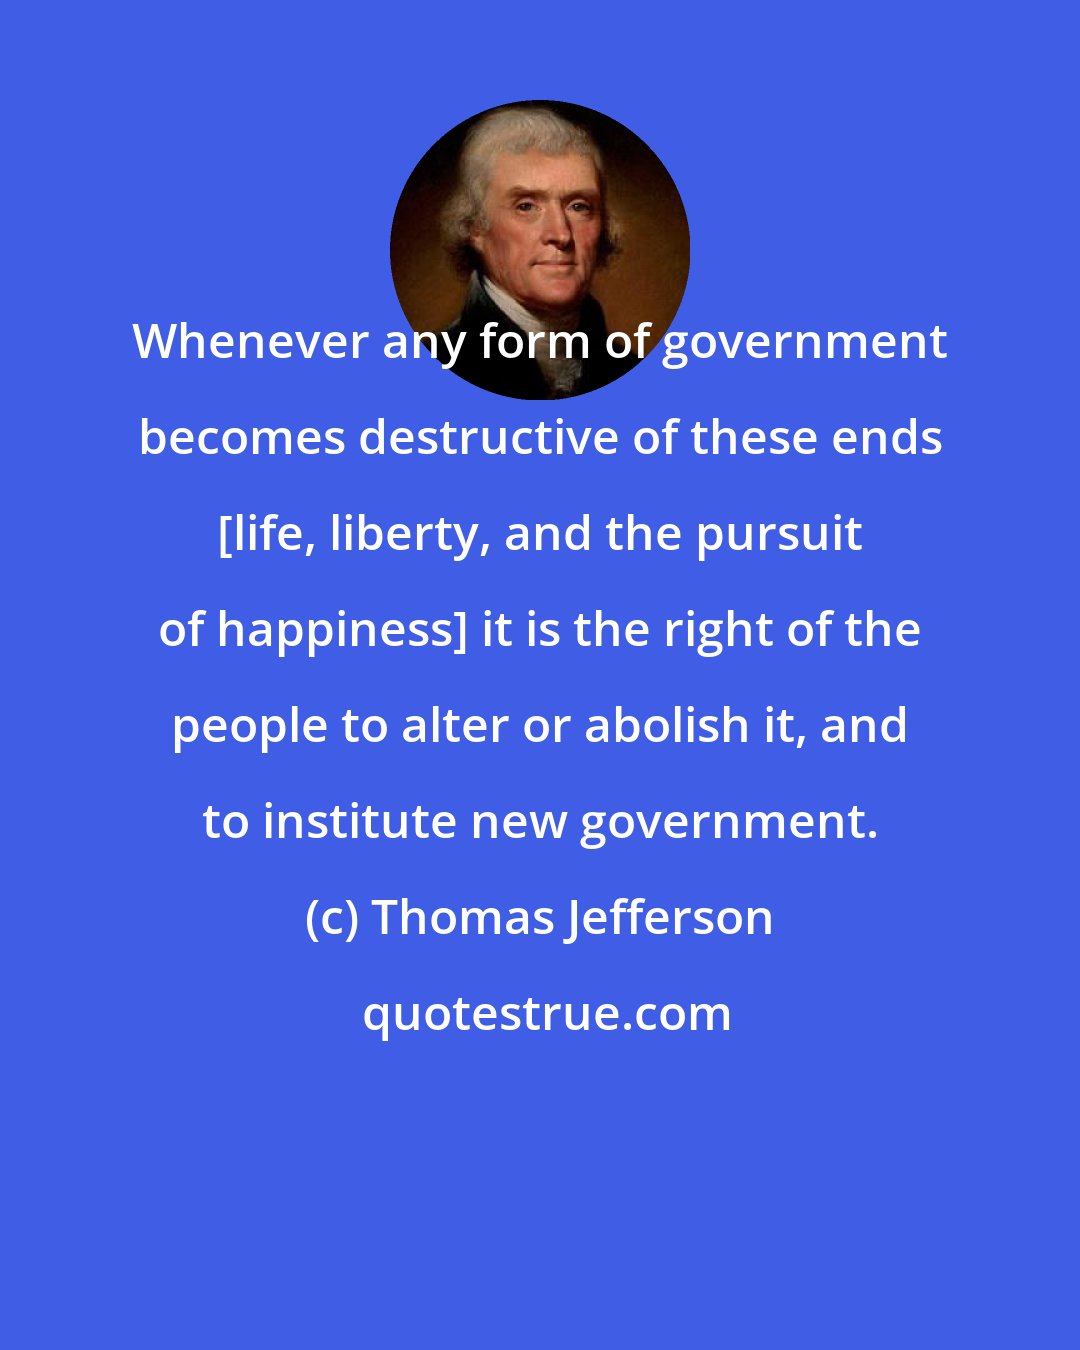 Thomas Jefferson: Whenever any form of government becomes destructive of these ends [life, liberty, and the pursuit of happiness] it is the right of the people to alter or abolish it, and to institute new government.